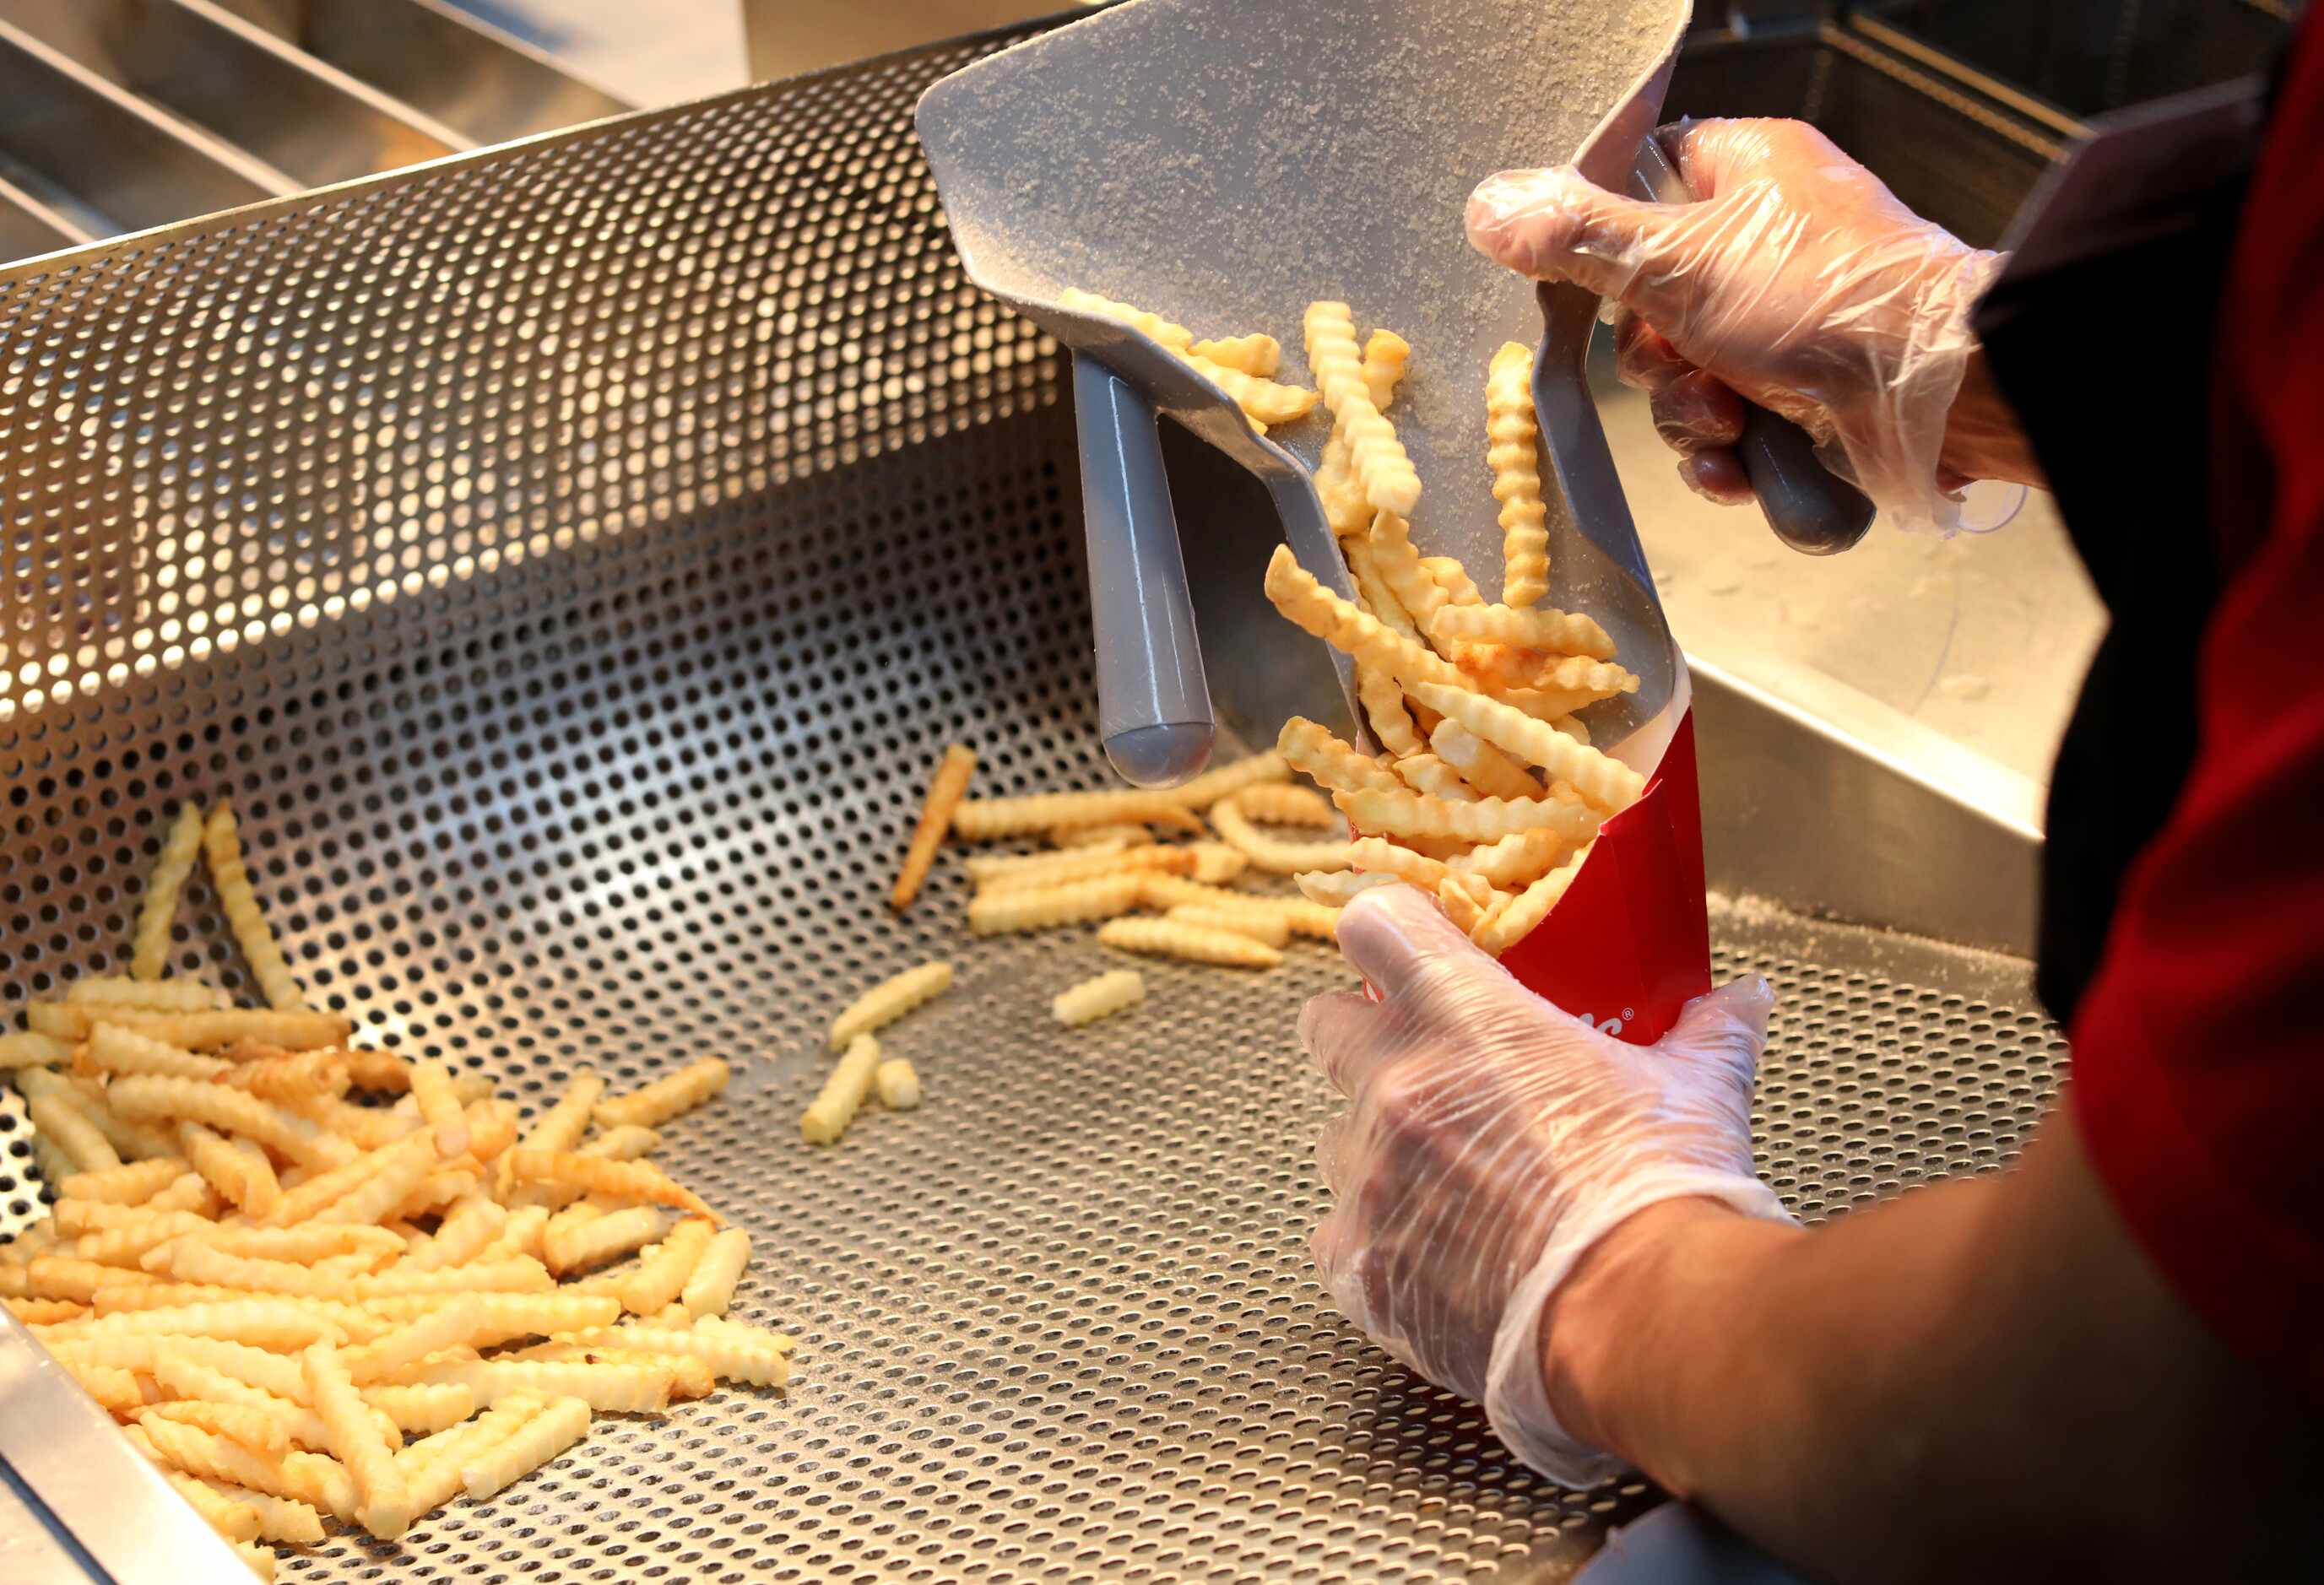 French fry orders are filled as fast as they can be fried at Portillo's in Allen.